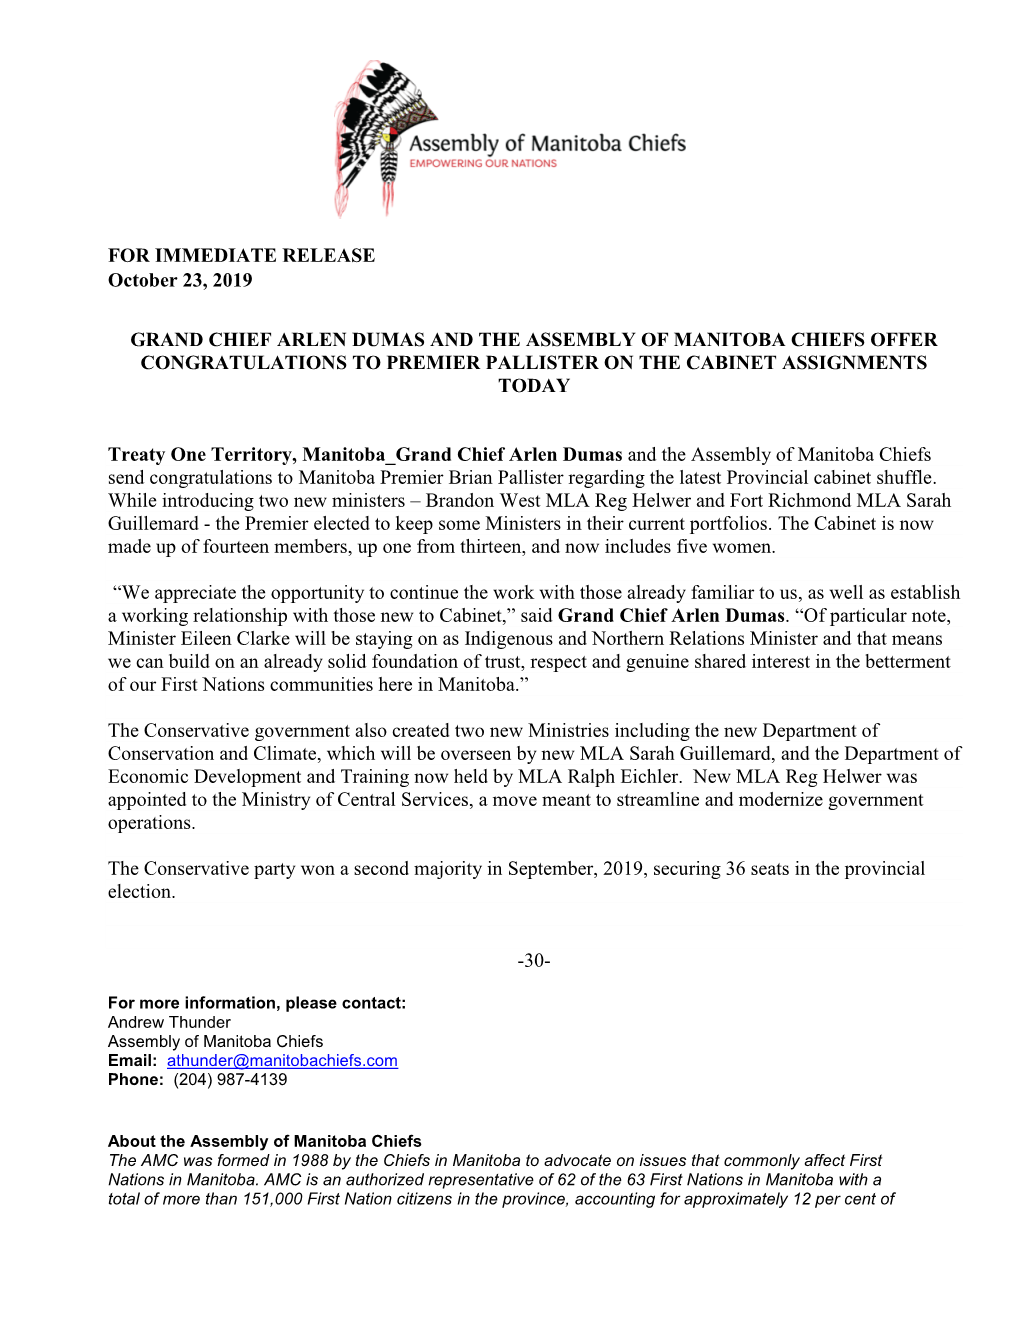 FOR IMMEDIATE RELEASE October 23, 2019 GRAND CHIEF ARLEN